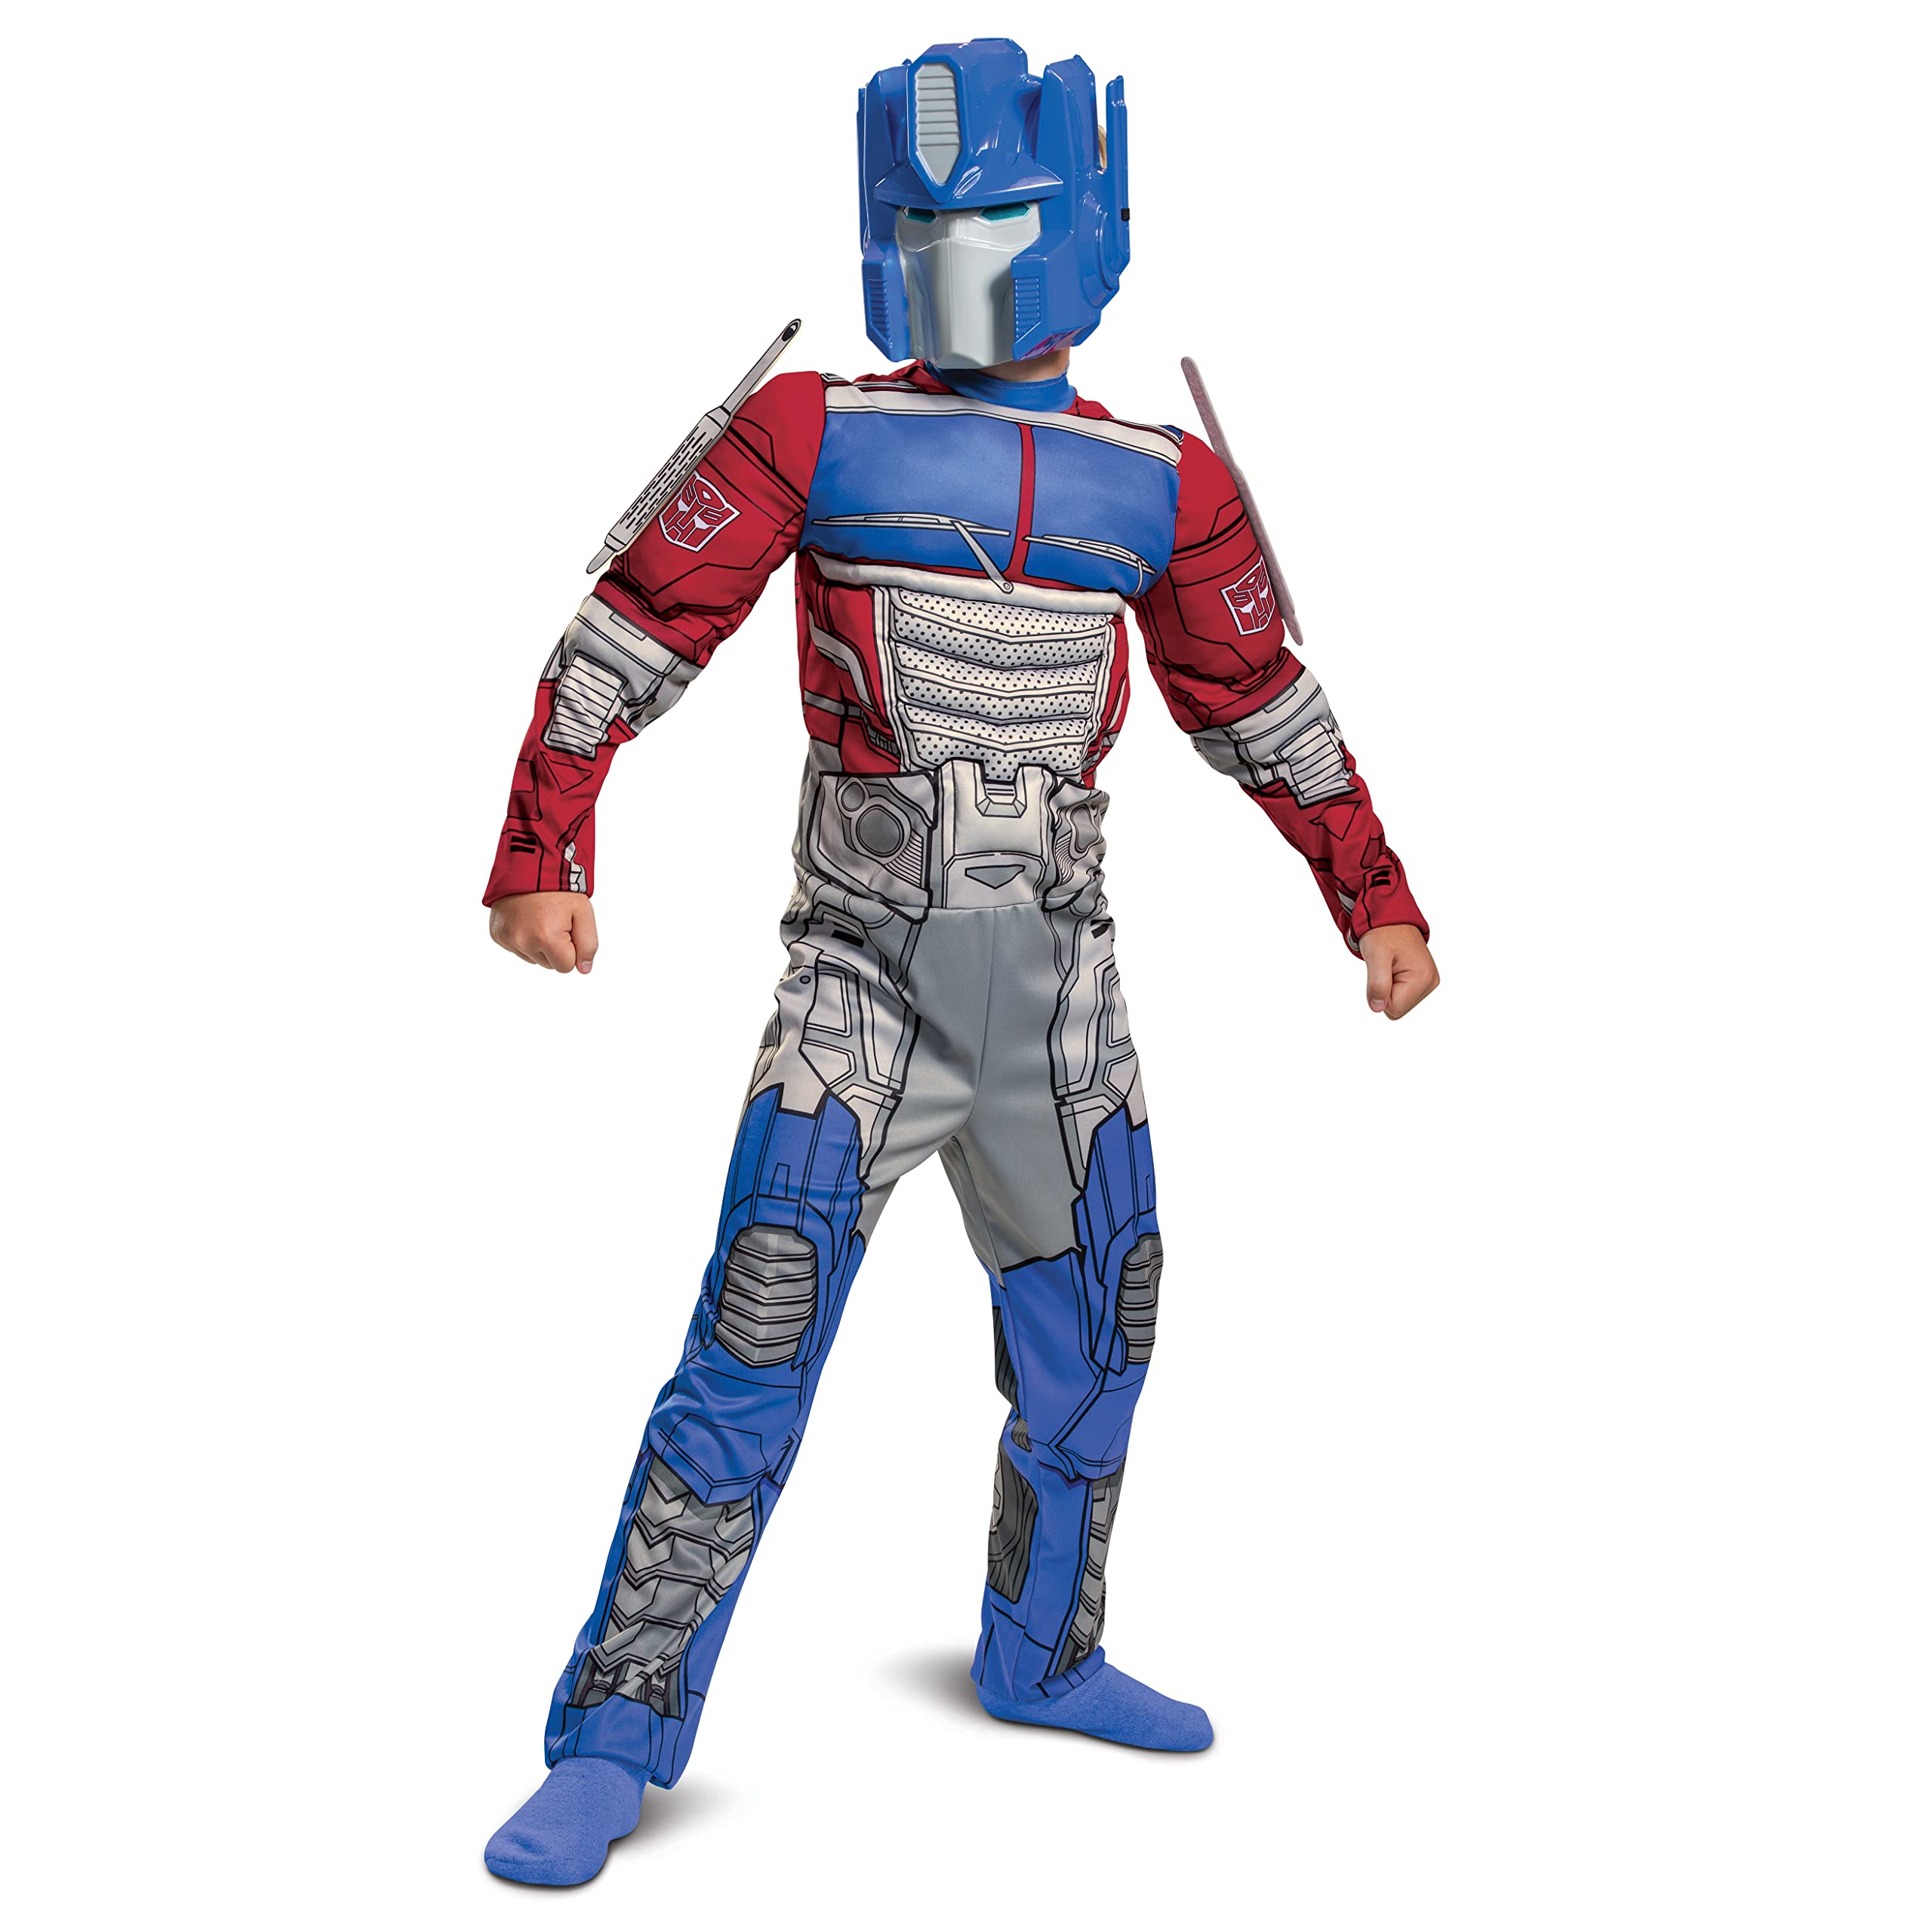 Disguise Optimus Prime Costume, Muscle Transformer Costumes for Boys, Padded Character Jumpsuit, Kids